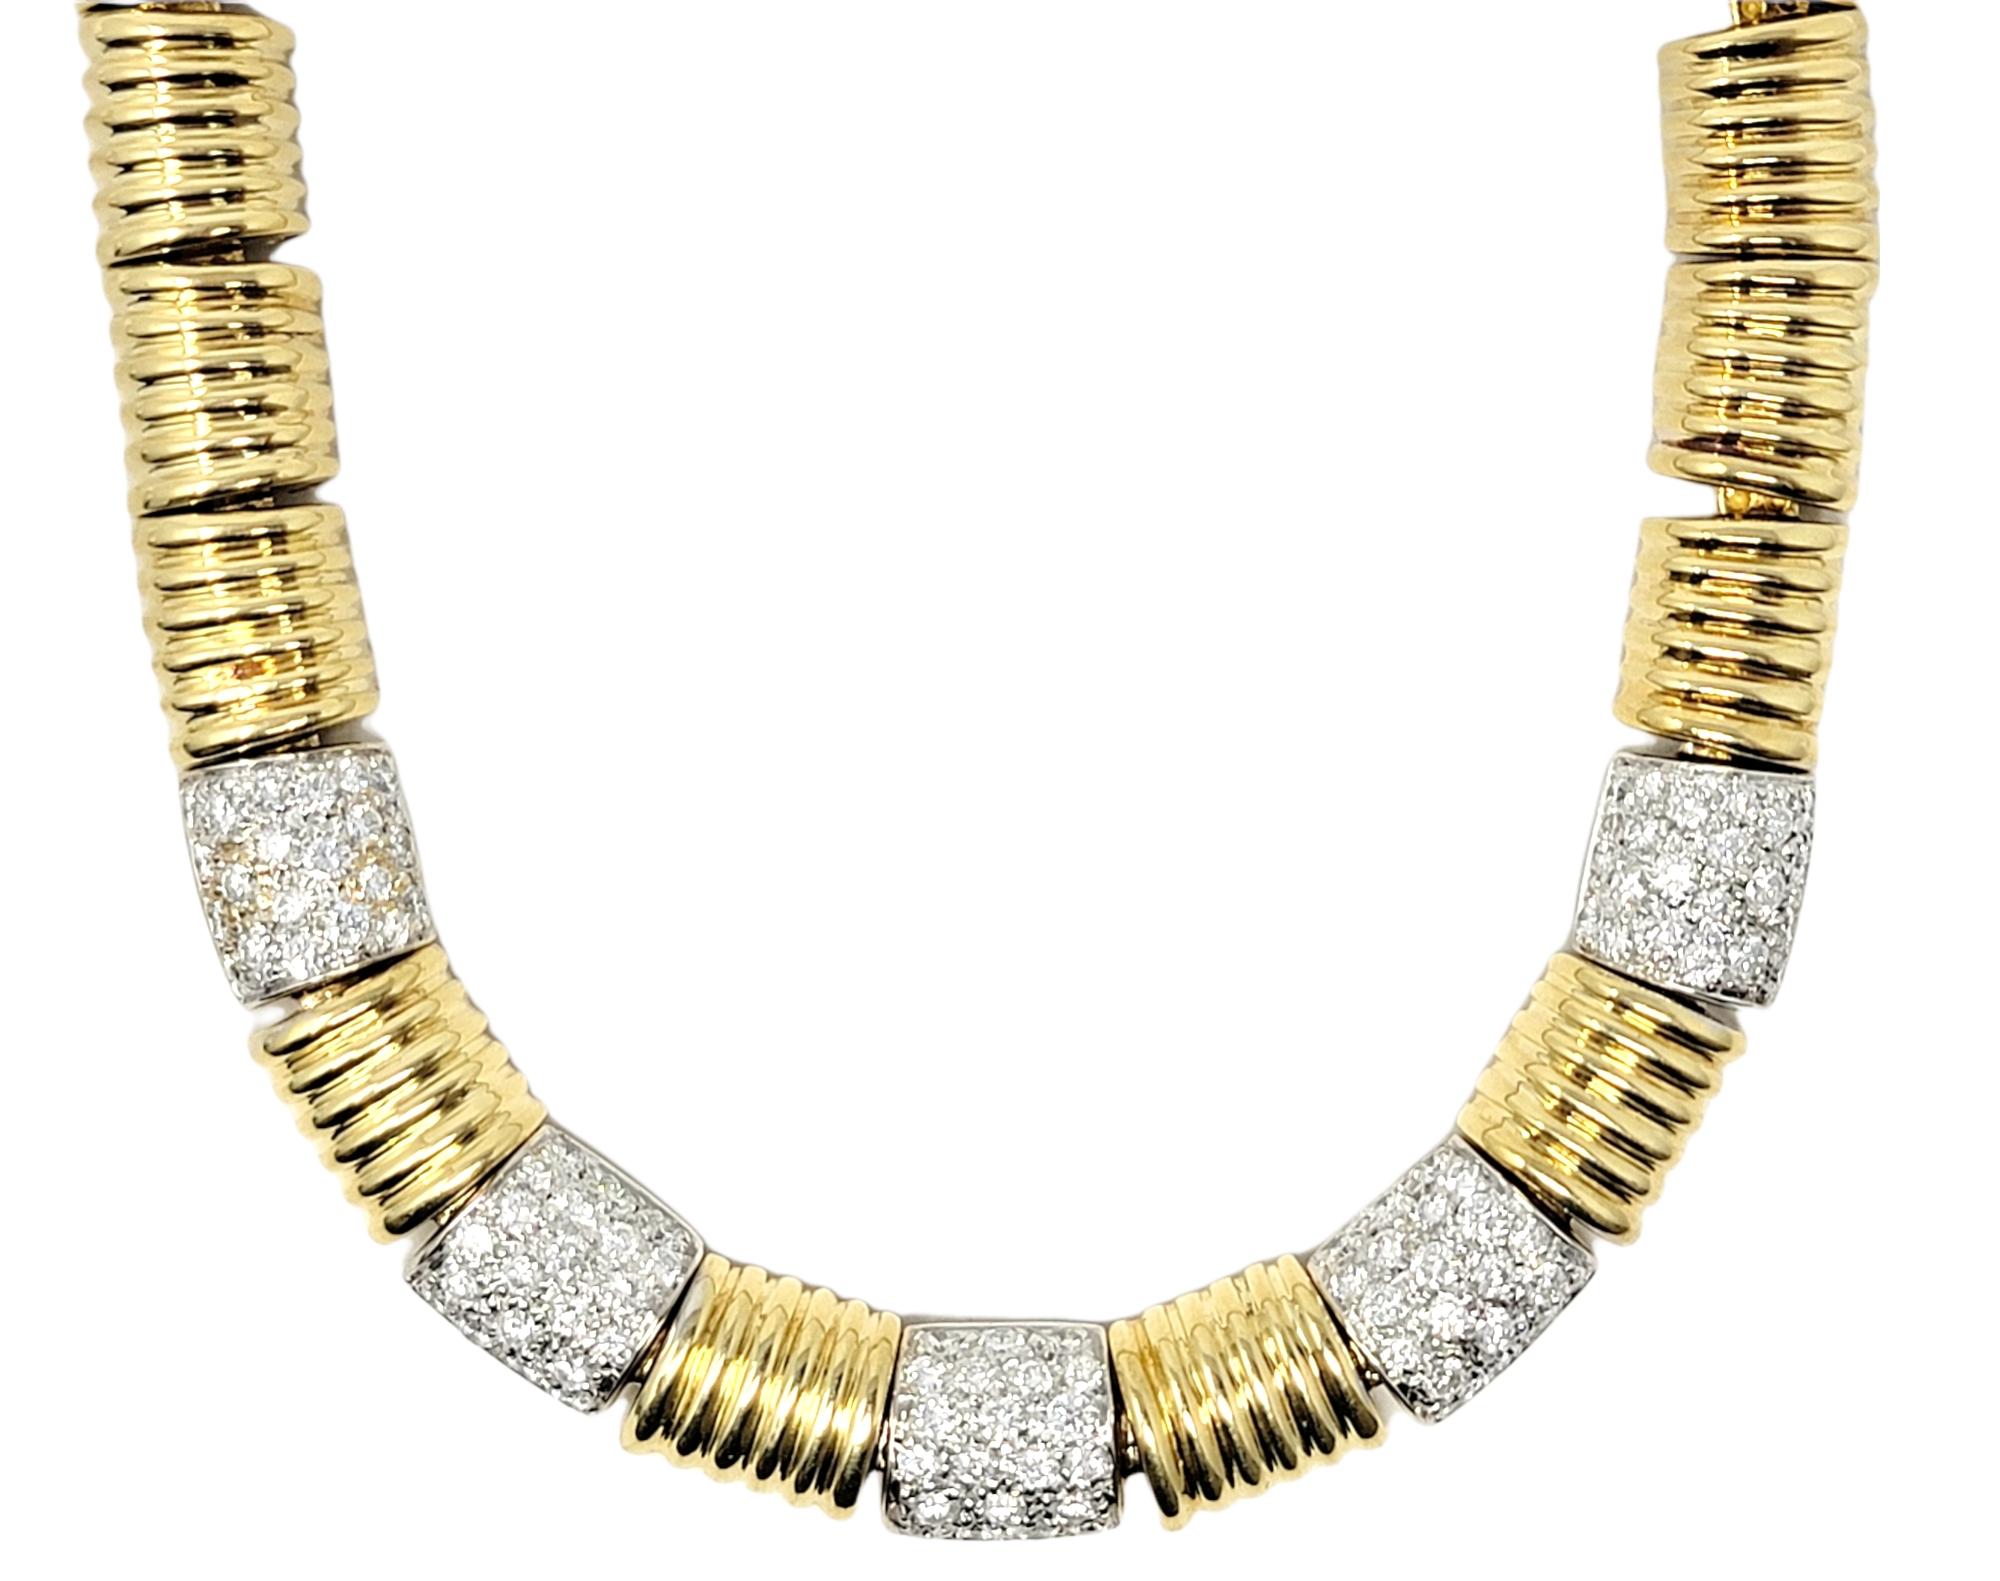 Simple yet incredibly elegant gold and diamond choker style necklace. This gorgeous necklace features a series of heavy, polished yellow gold chunky ridged links arranged in a single row.  At the center of the necklace are 5 white gold links